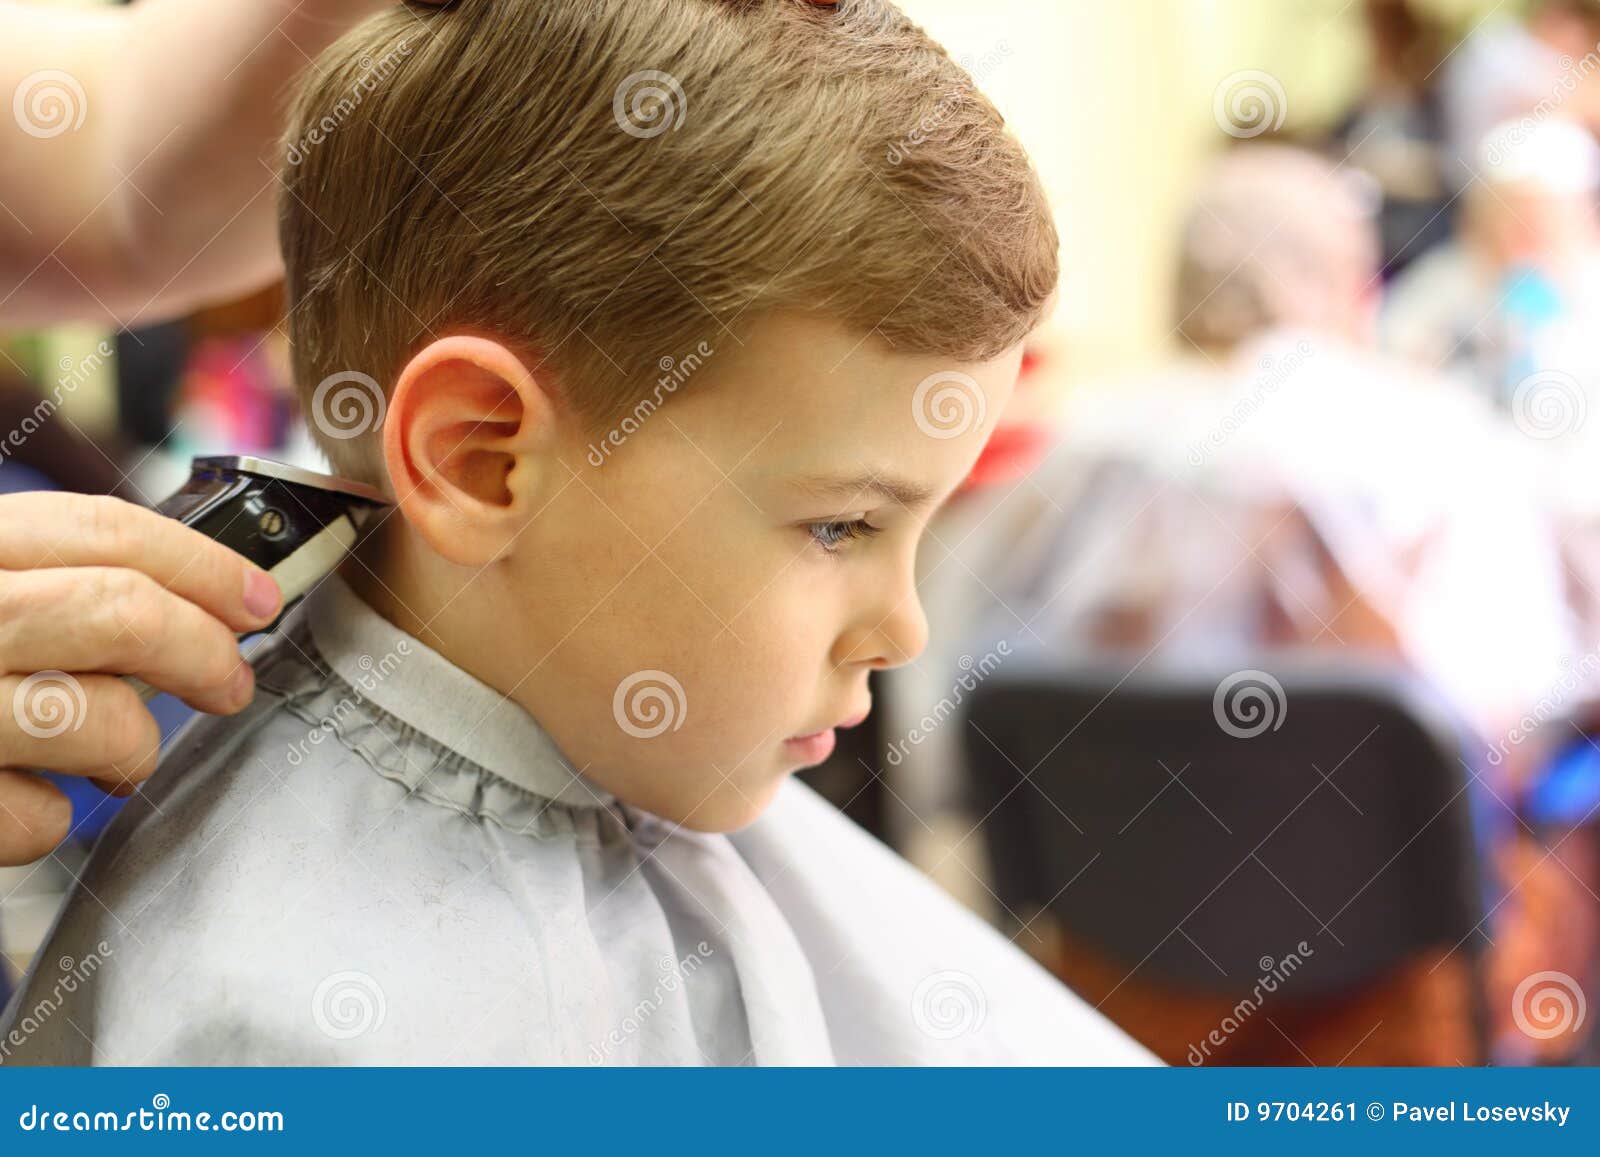 Hair cutting machine Images and Stock Photos. 1,151 Hair cutting machine  photography and royalty free pictures available to download from thousands  of stock photo providers.